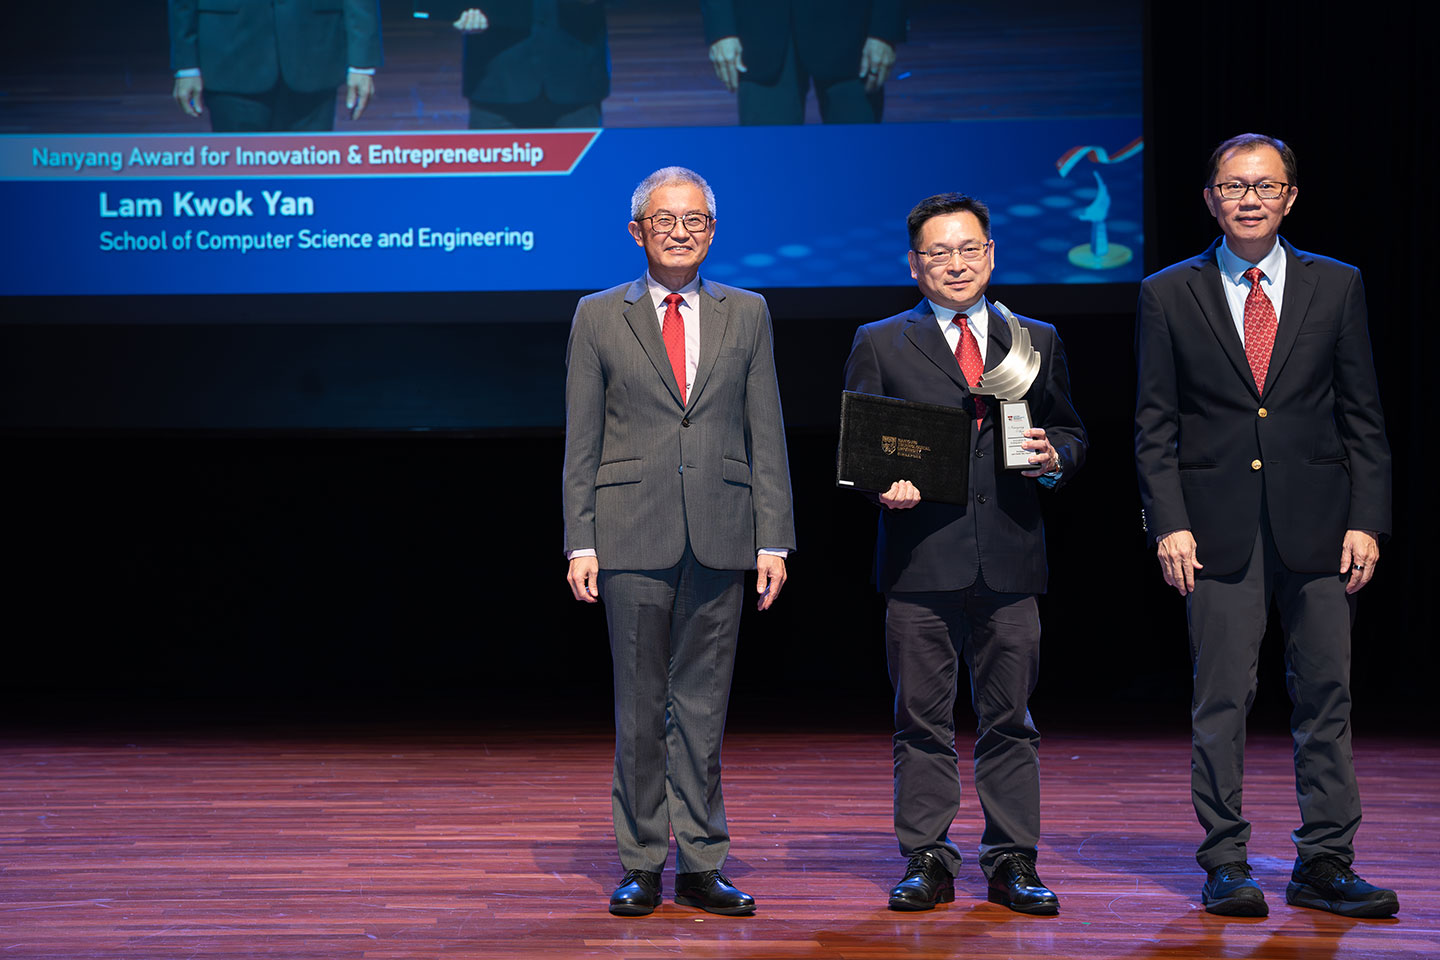 Photo of a Professor holding his award and certificate on stage with two Professors by his side on stage.